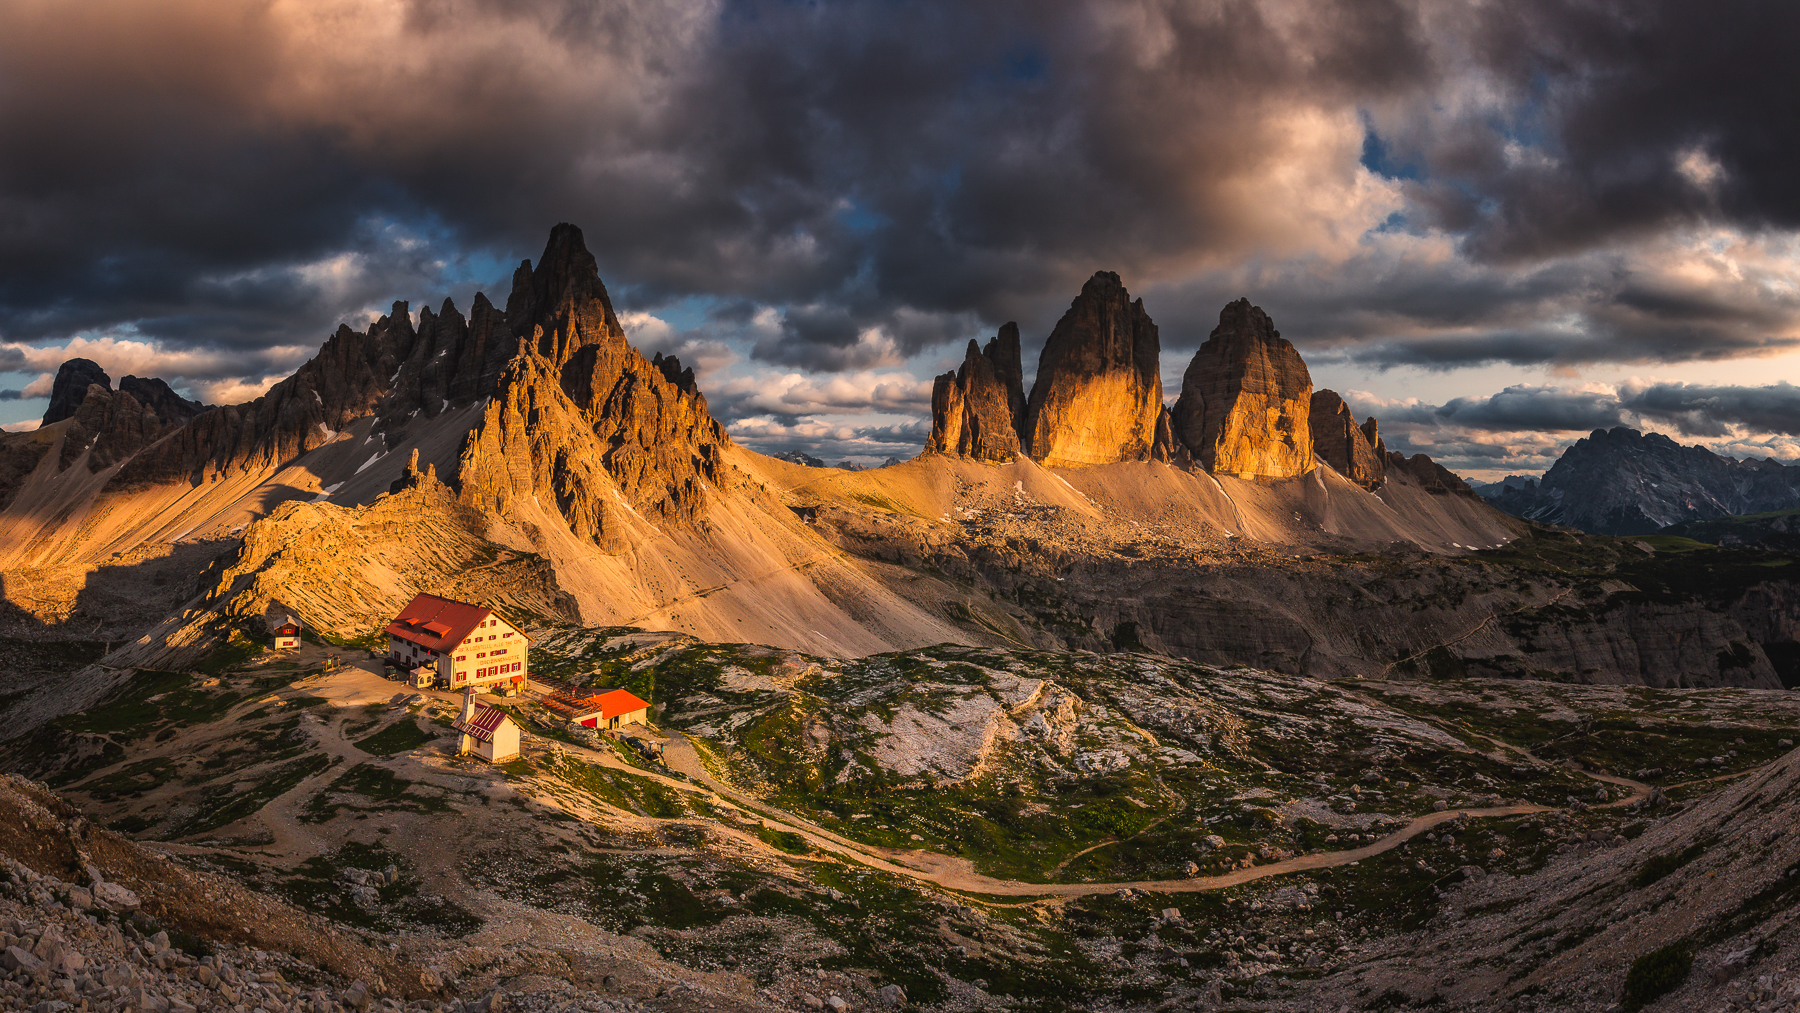 Landscape Nature Dolomites Mountains Italy Mountains Rocks Clouds Road Sunlight 1800x1013